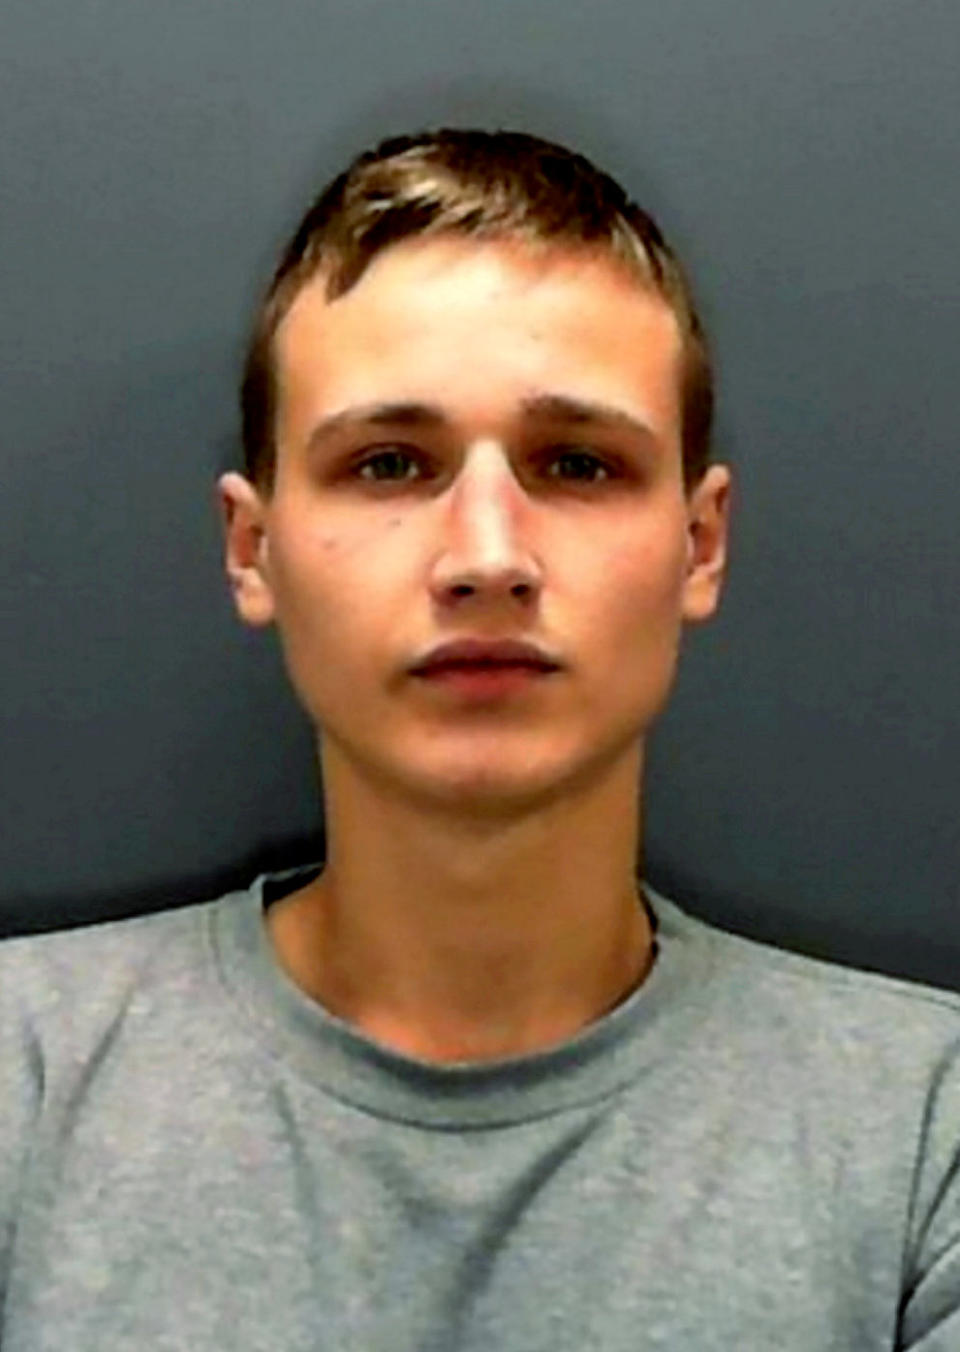 Dawid Goral, 21, of Durham Street, was sentenced to life imprisonment and must serve a minimum of 21 years before he is considered for release. (SWNS)